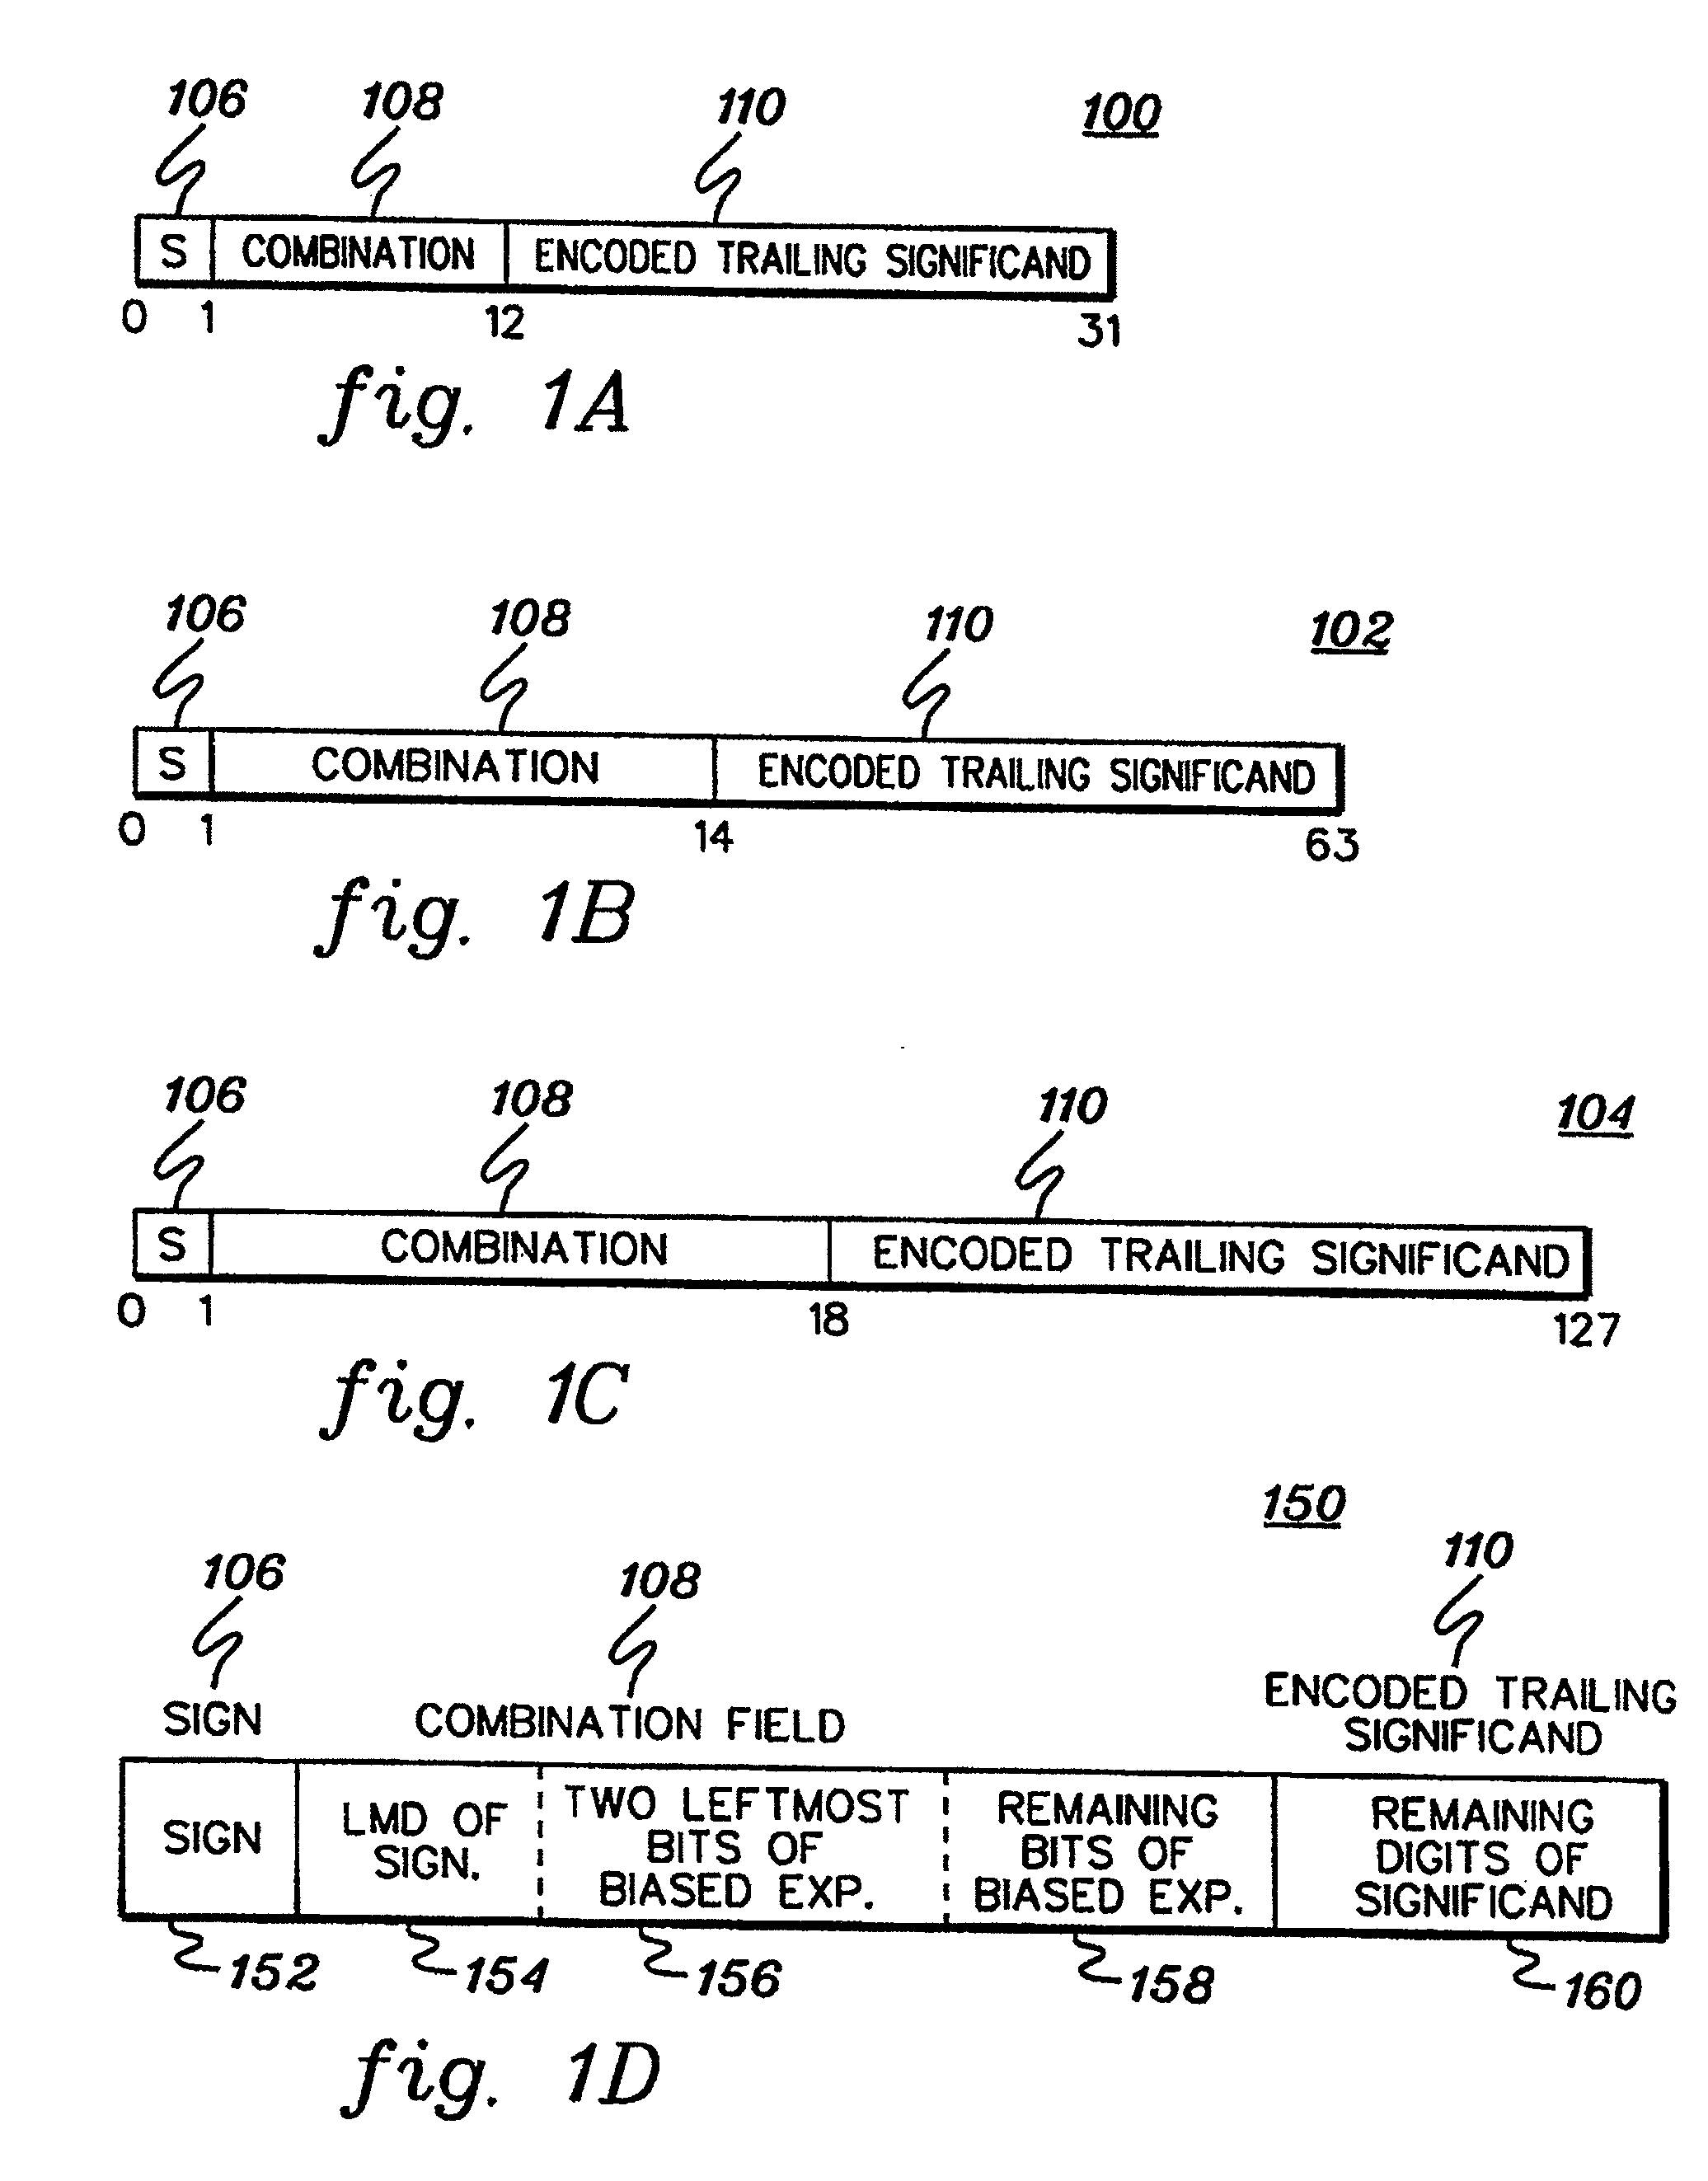 Decomposition of decimal floating point data